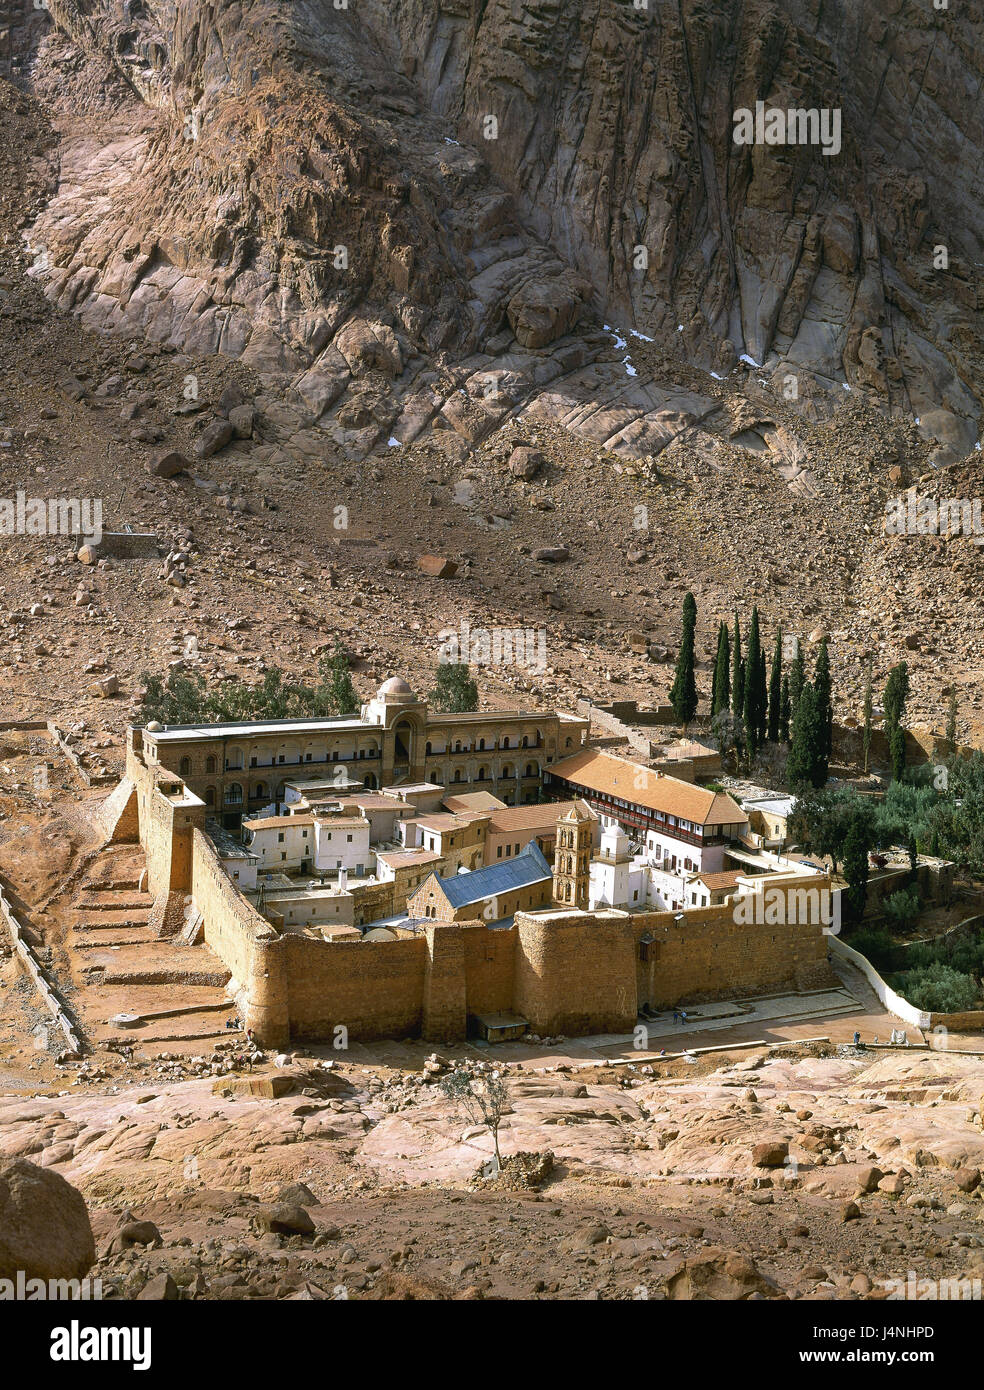 Egypt, the Mount Sinai, the Monastery of St Catherine, Africa, North Africa, Sinai, mountain landscape, mountain, Sinai, mountain Moses, cloister, Greek-orthodox, 548-565, historically, story, faith, religion, UNESCO-world cultural heritage, overview, Stock Photo